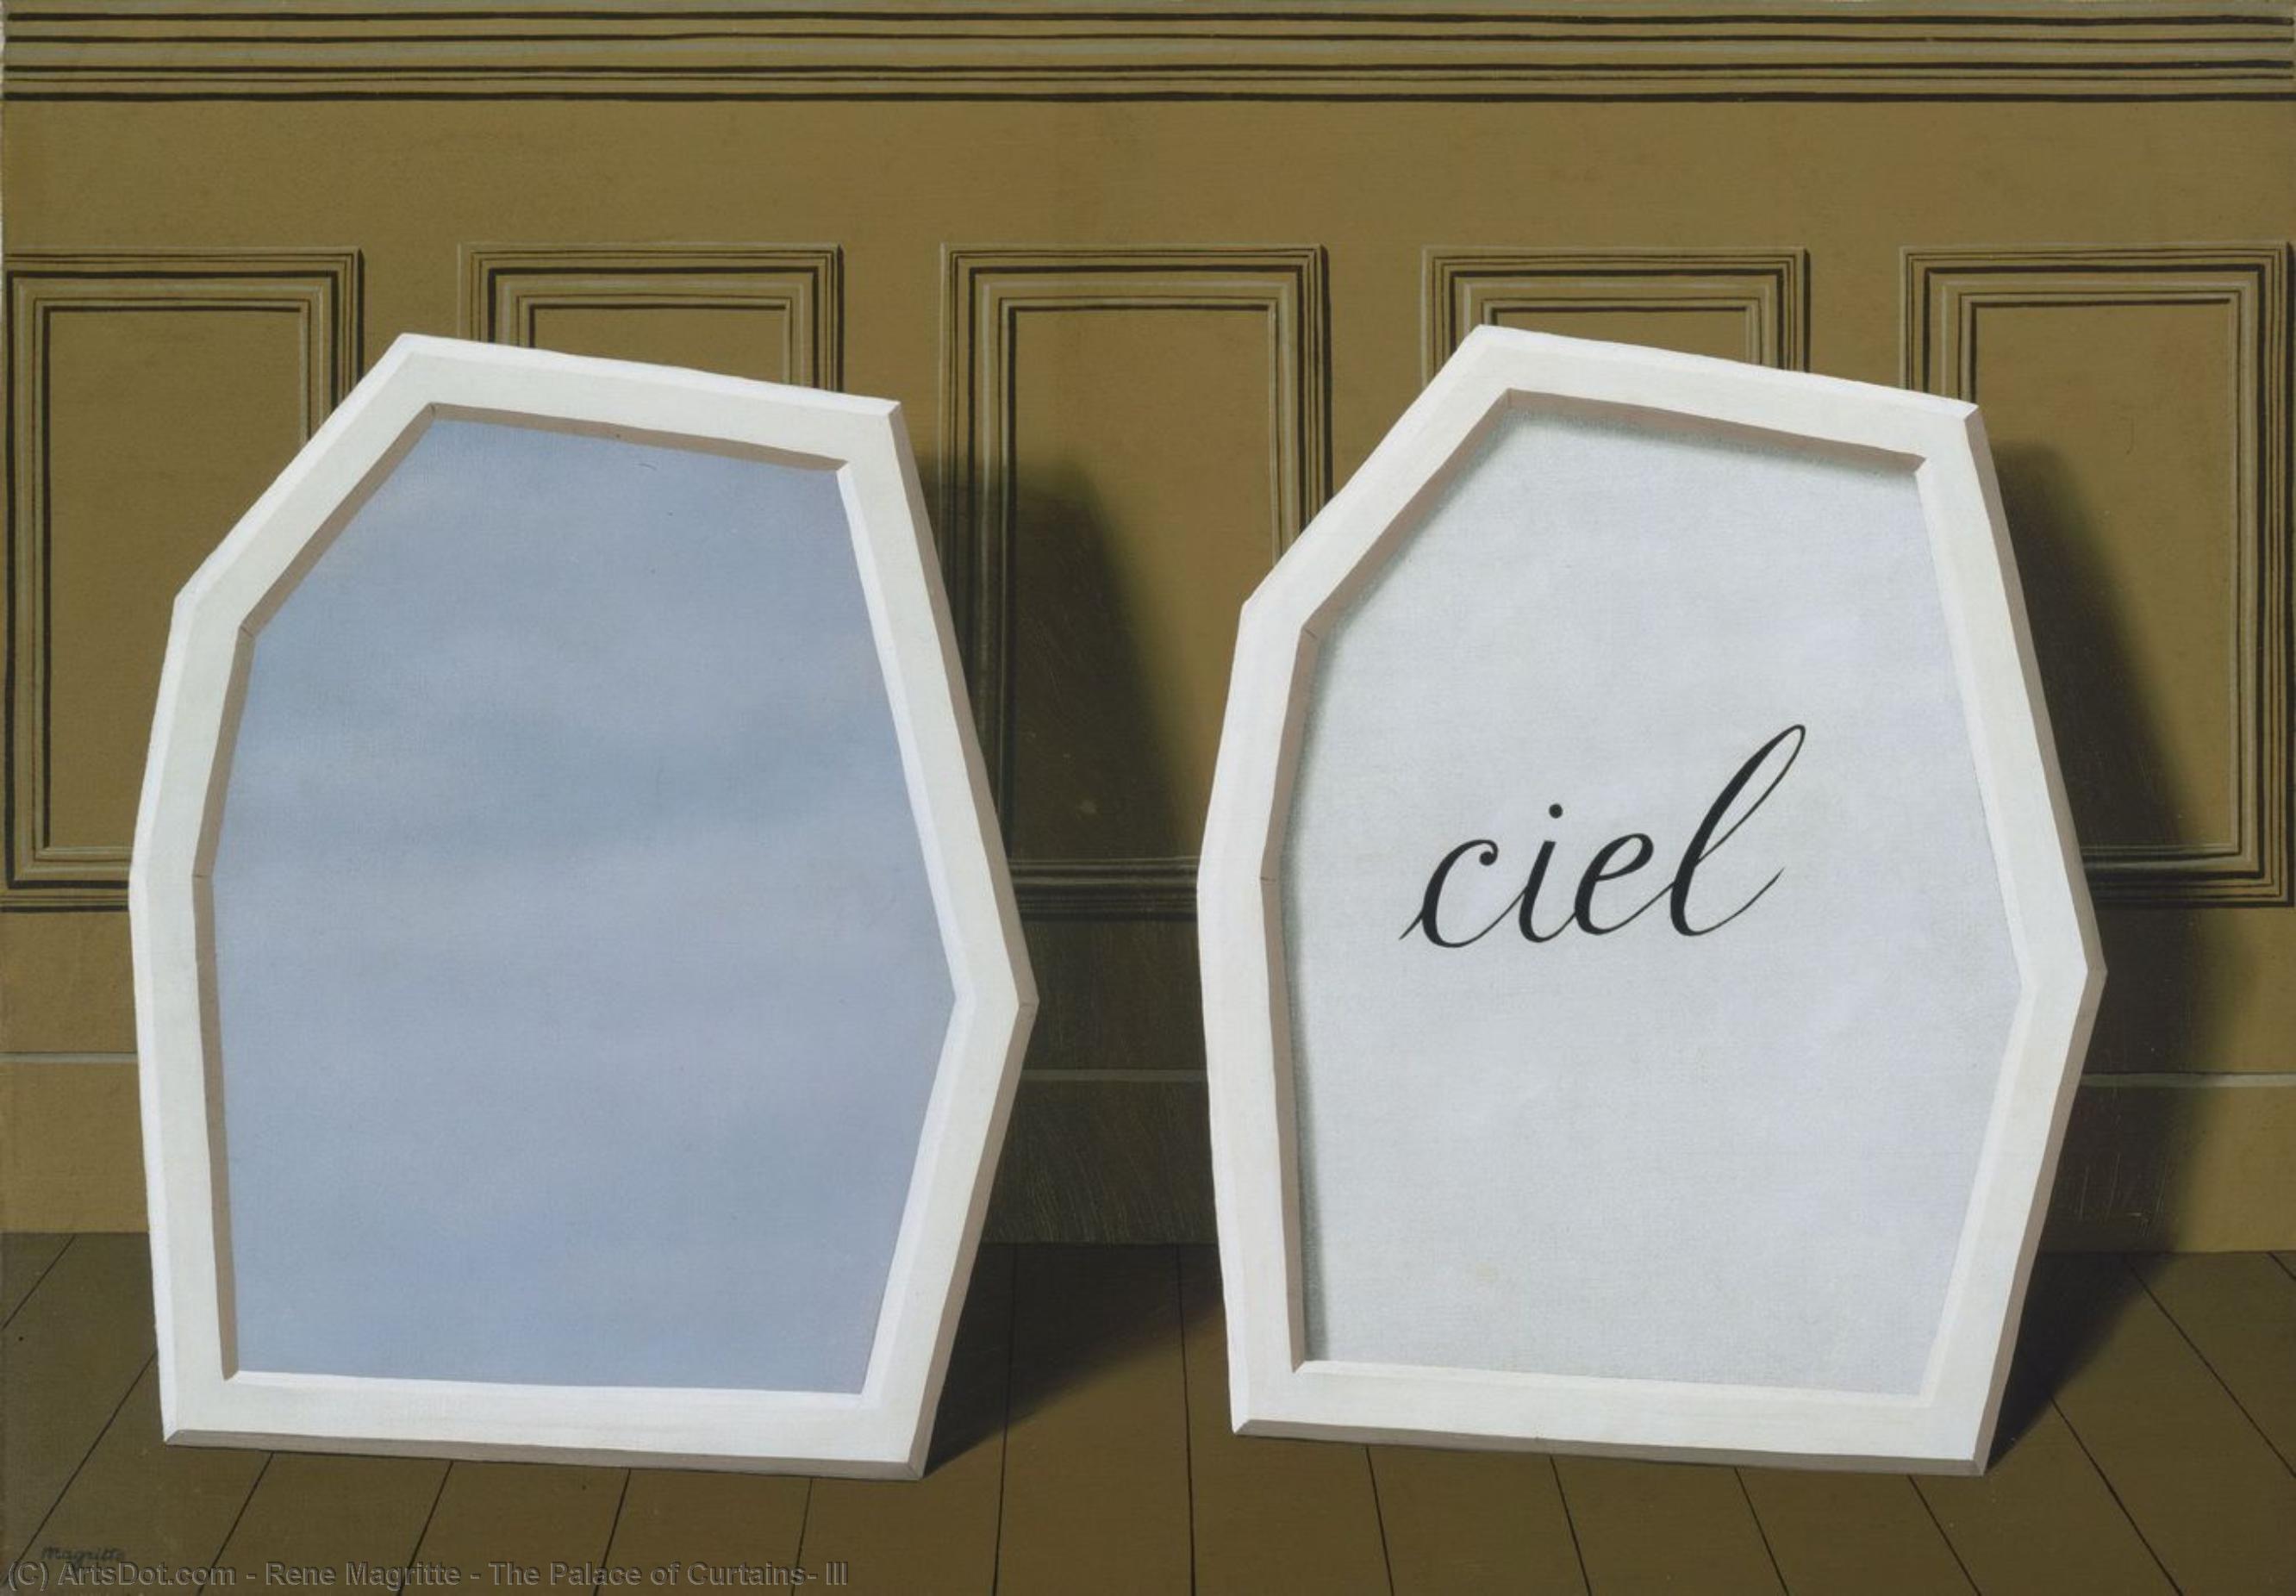 Order Paintings Reproductions The Palace of Curtains, III by Rene Magritte (Inspired By) (1898-1967, Belgium) | ArtsDot.com